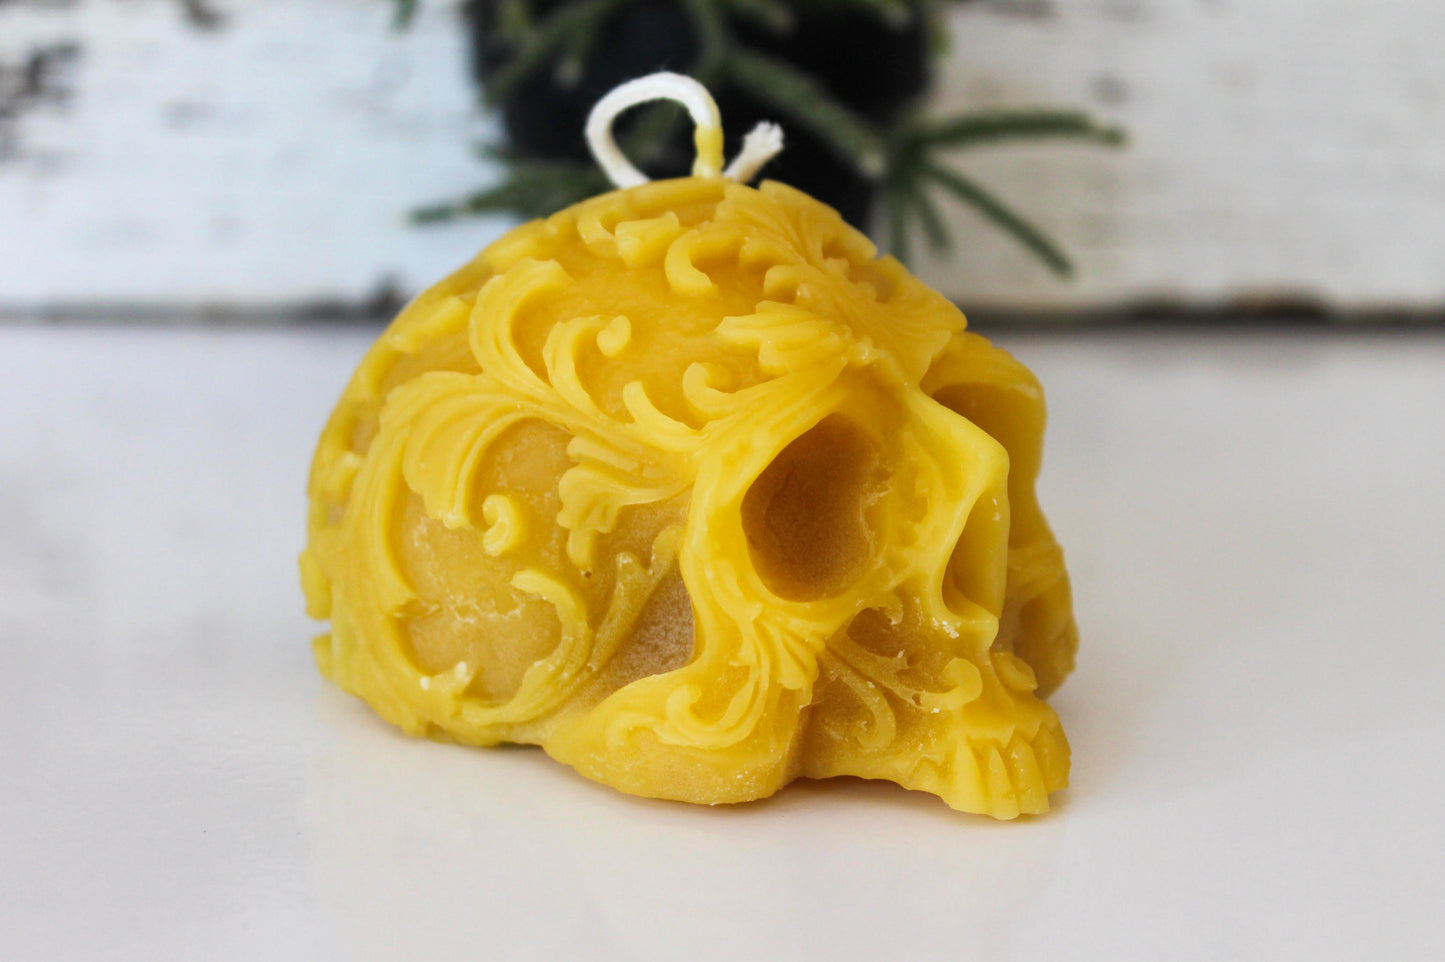 handmade skull beeswax candle with cotton wick